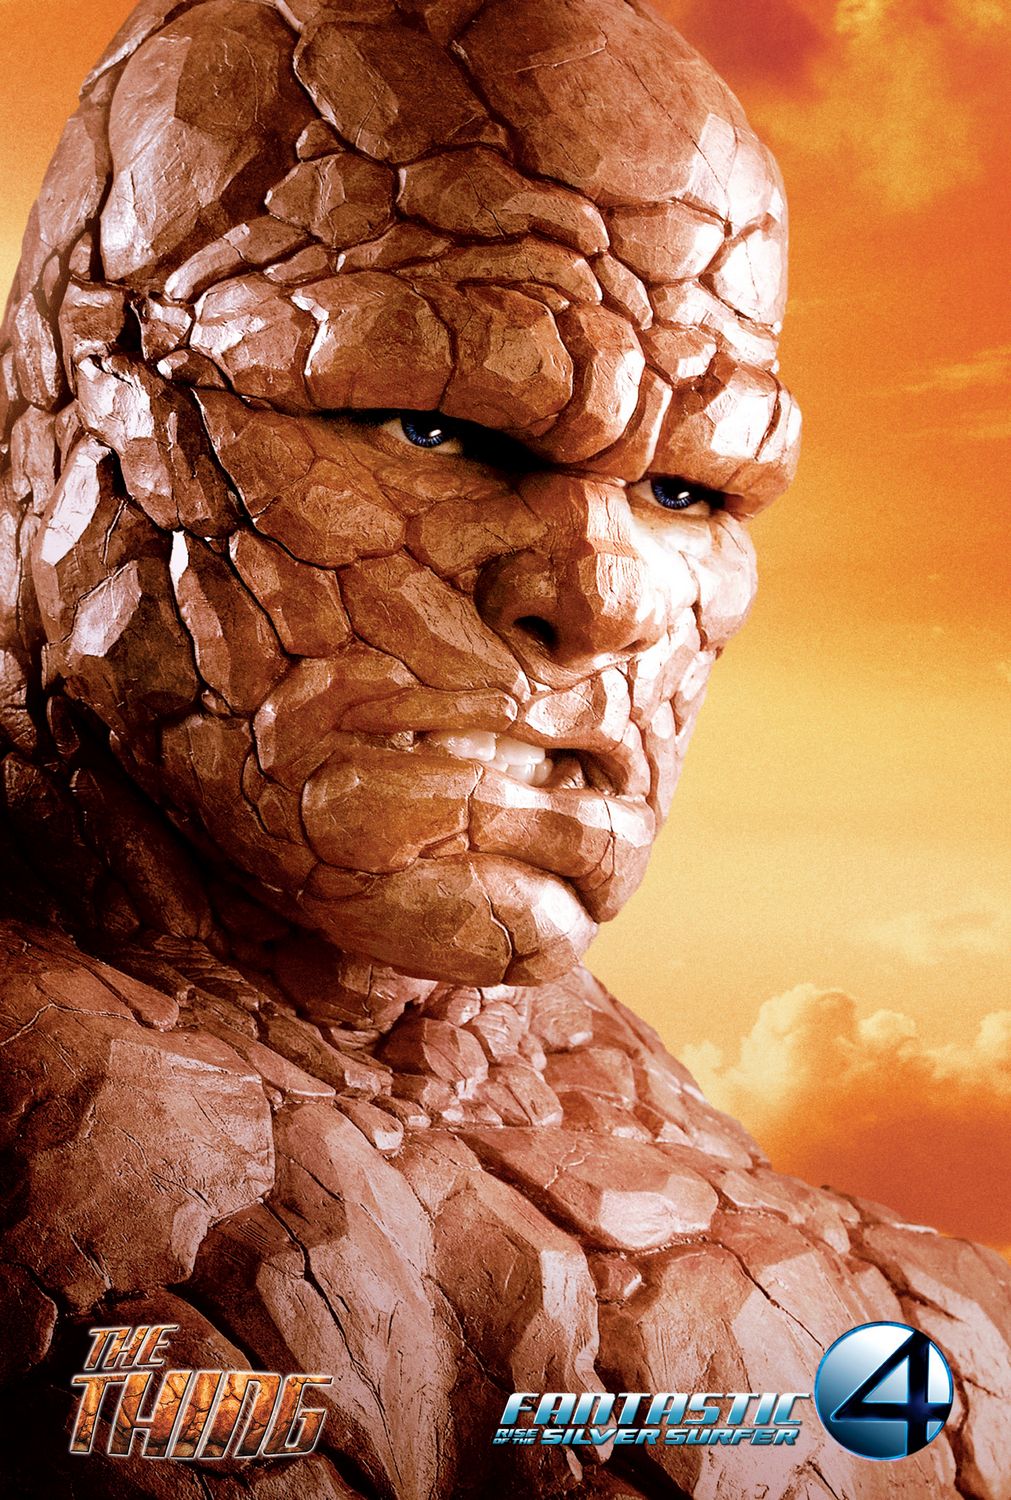 Movie Re Fantastic Four Rise Of The Silver Surfer